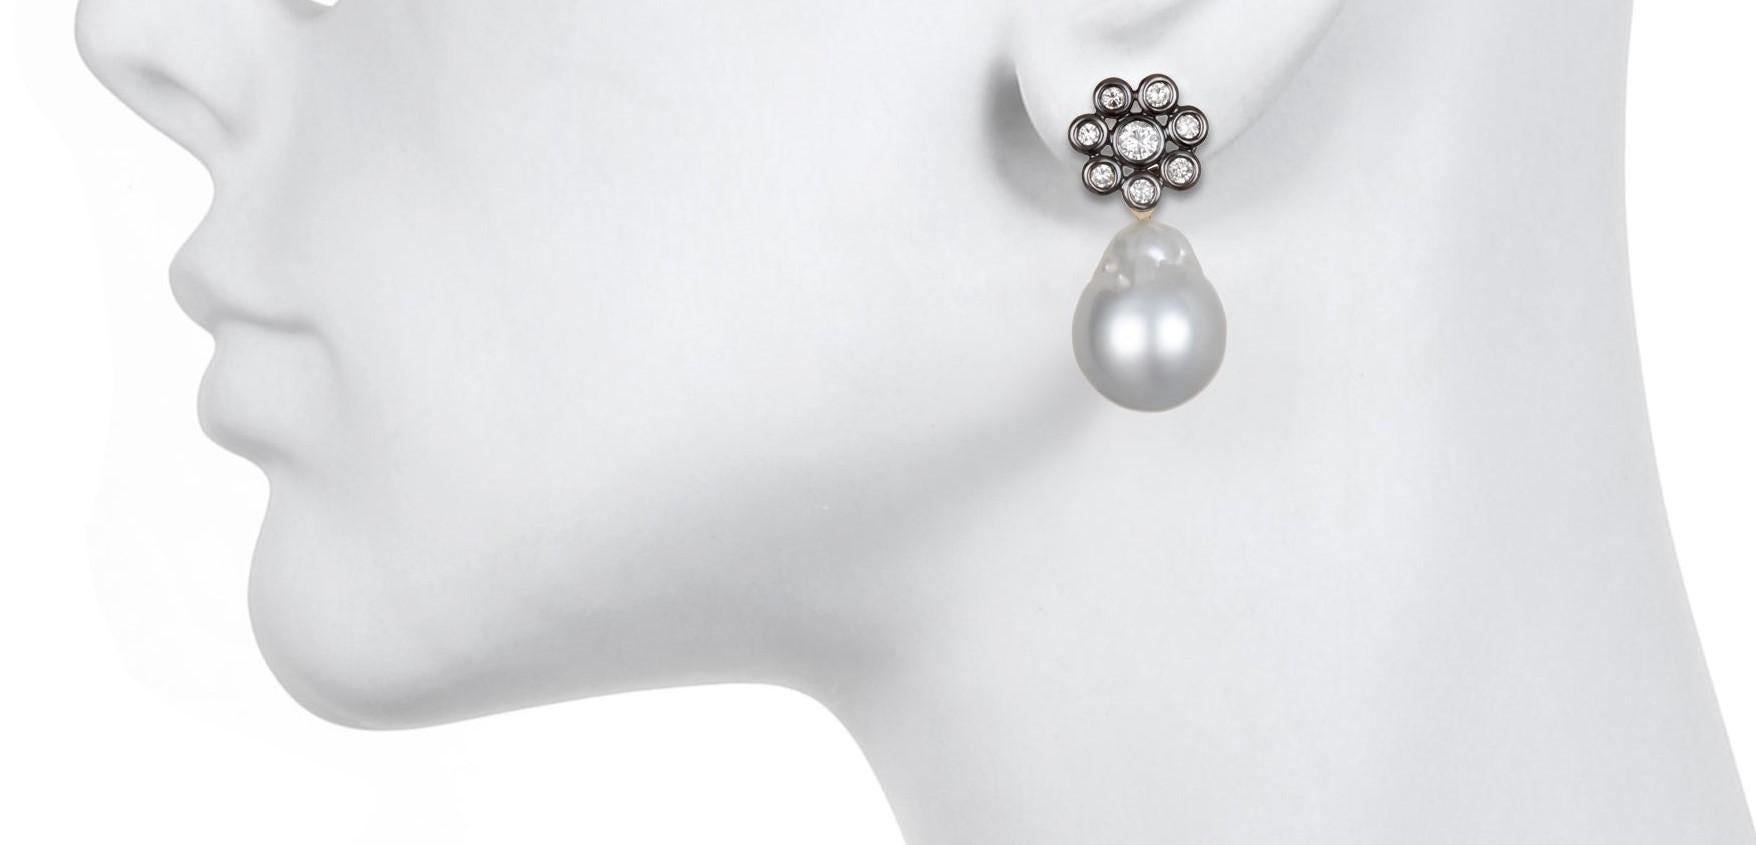 Faye Kim's white rose cut diamond earrings are handmade in 18k gold and finished with Black Rhodium. Wearable and versatile, these earrings can take you effortlessly from day into evening - shown with white south sea baroque pearl drops which are